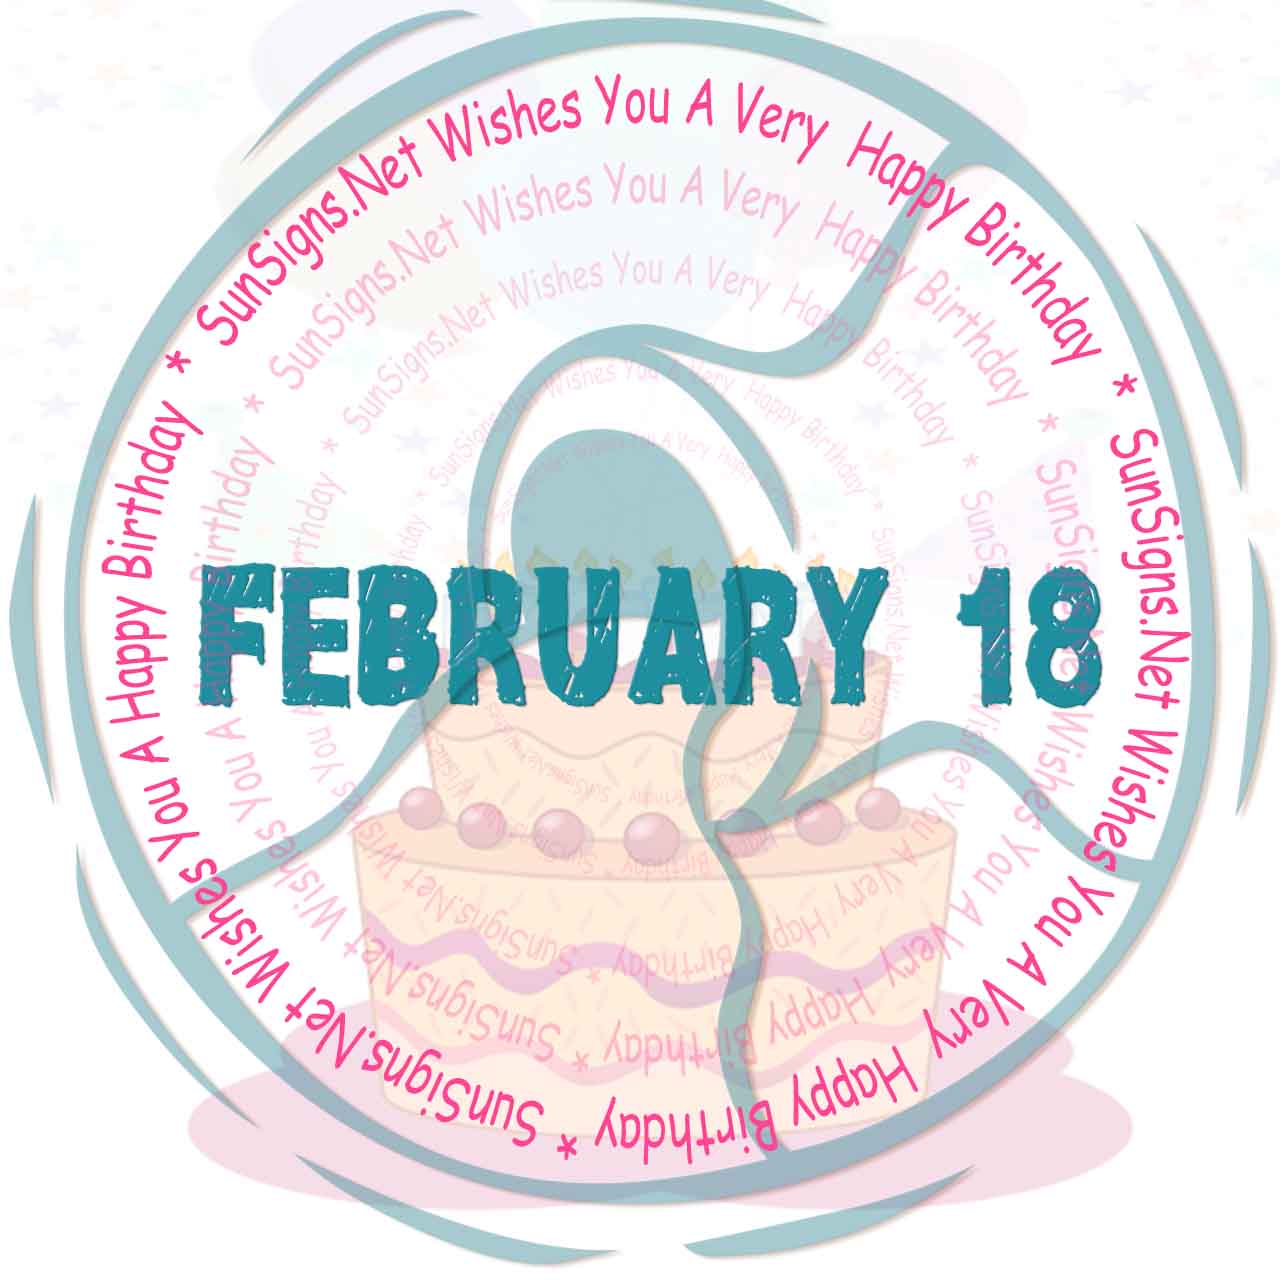 february-18-zodiac-is-a-cusp-aquarius-and-pisces-birthdays-and